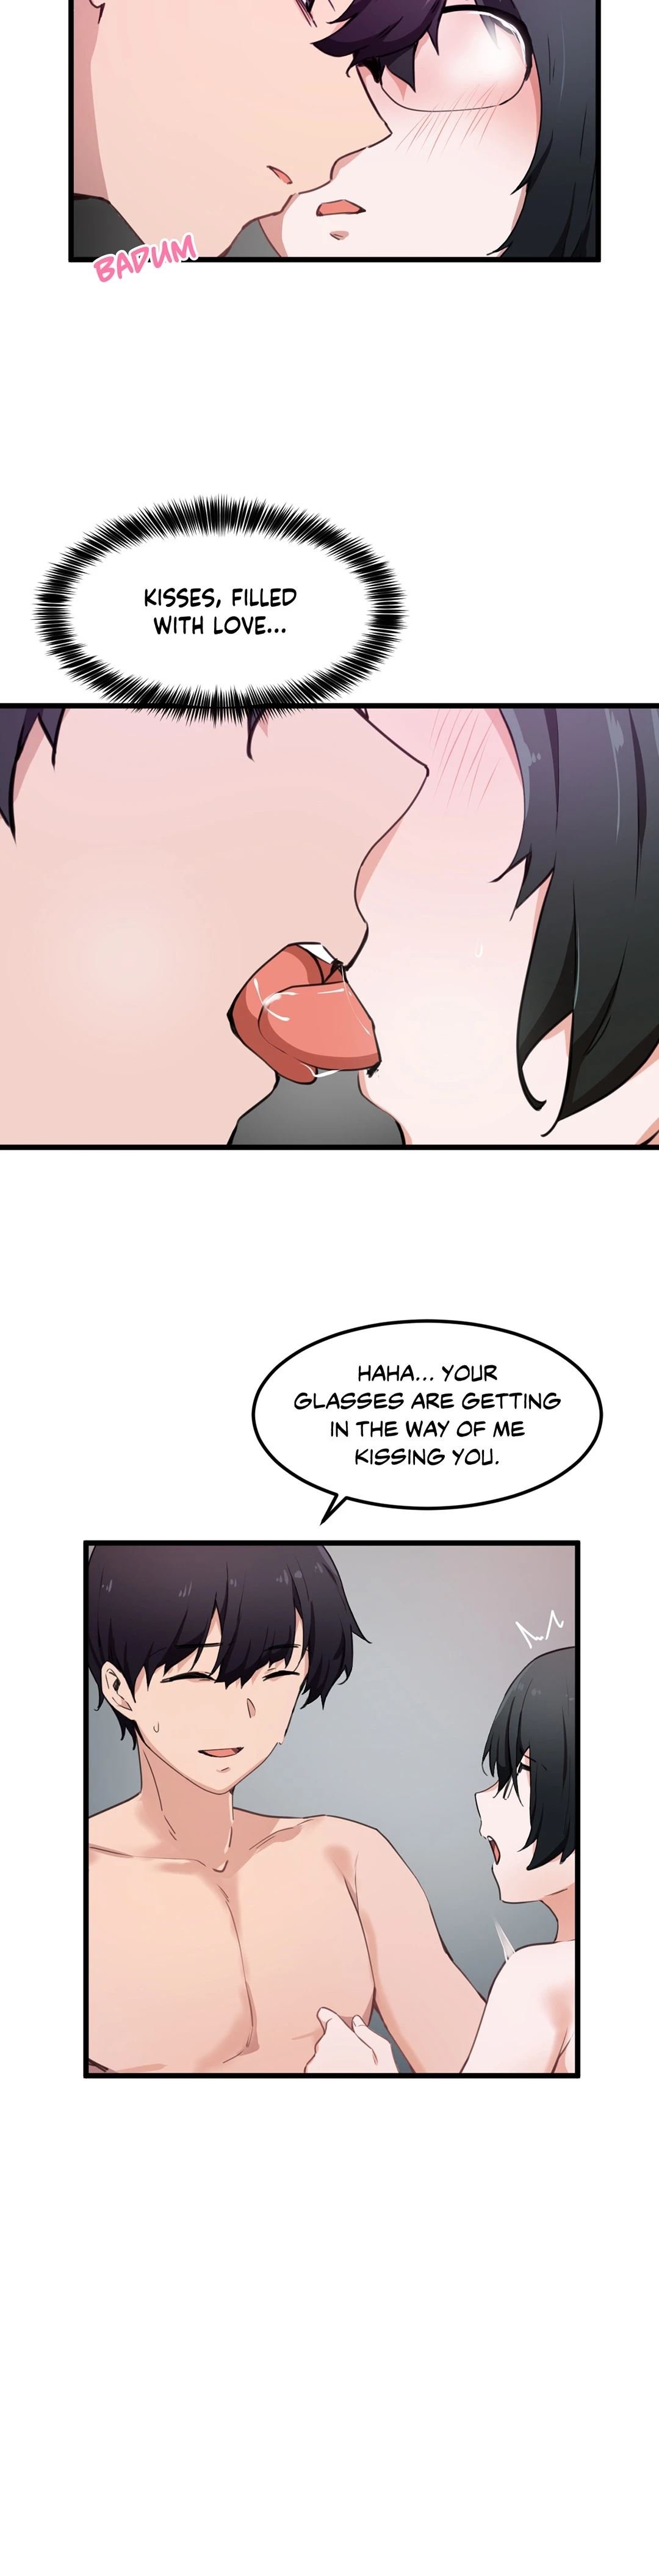 i-wanna-be-a-daughter-thief-chap-33-1